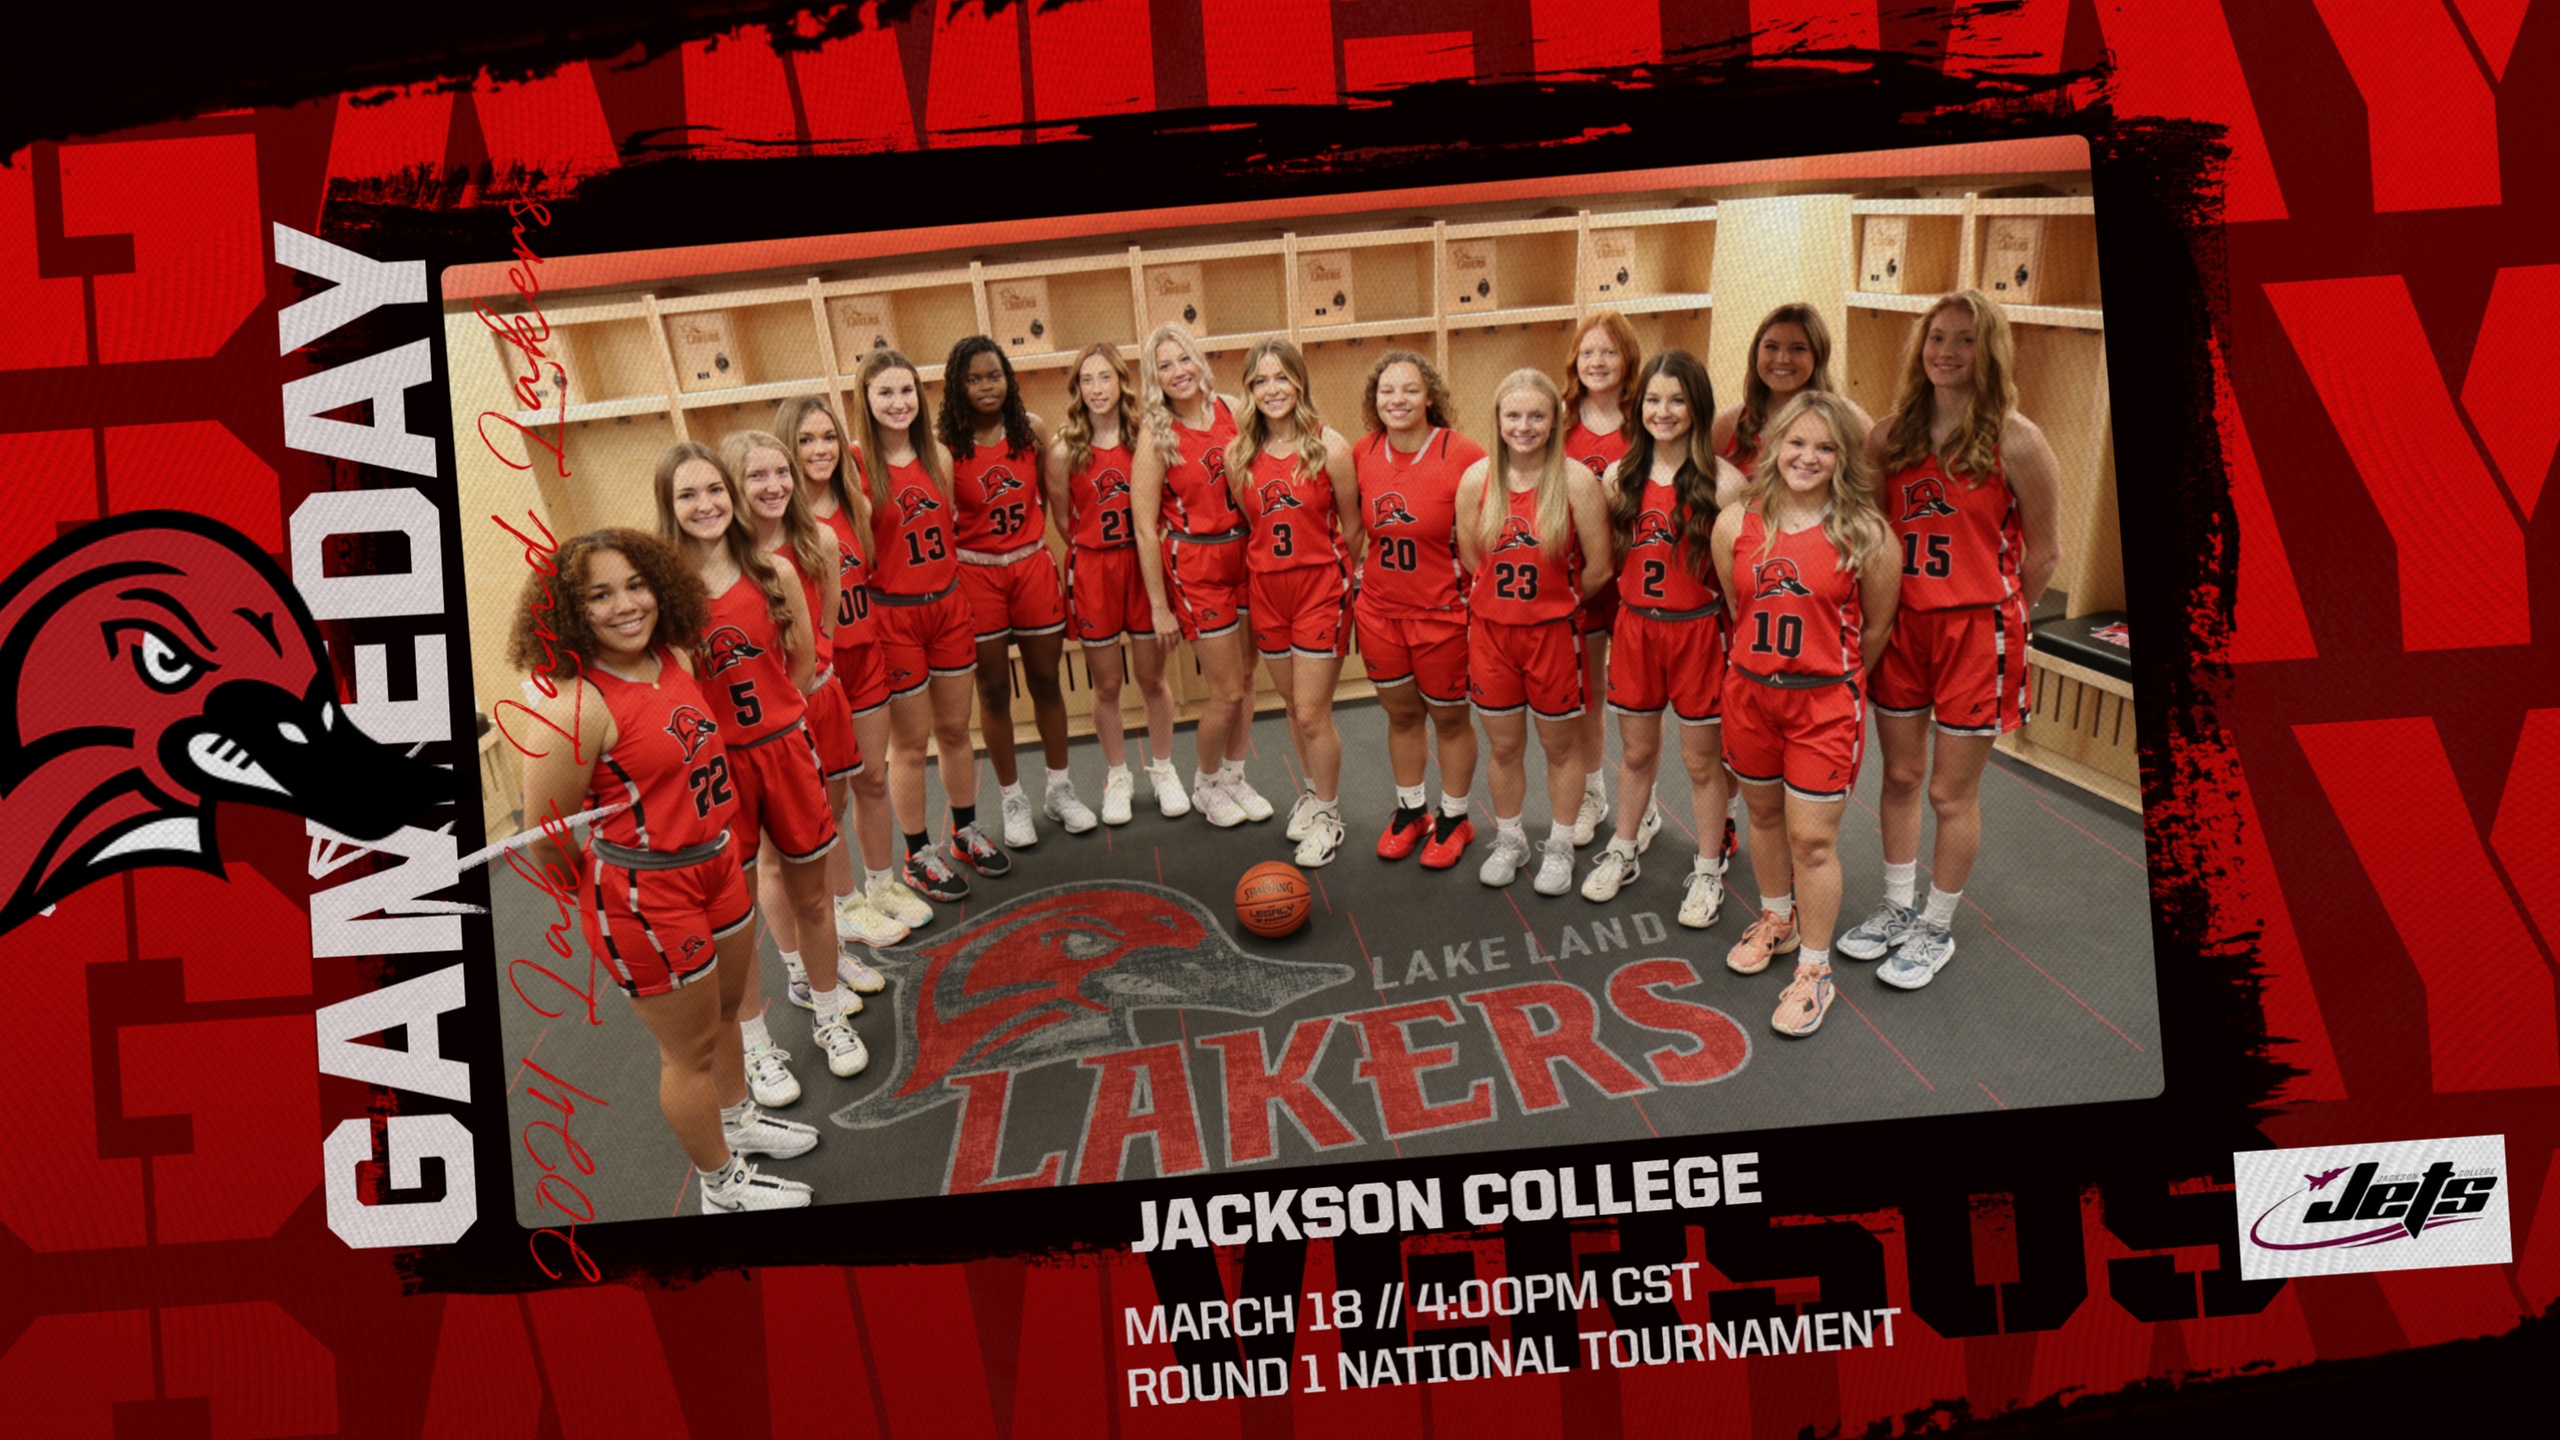 #15 seeded Lakers take on the Jets in the 1st round of the NJCAA DII Women's Basketball Tournament